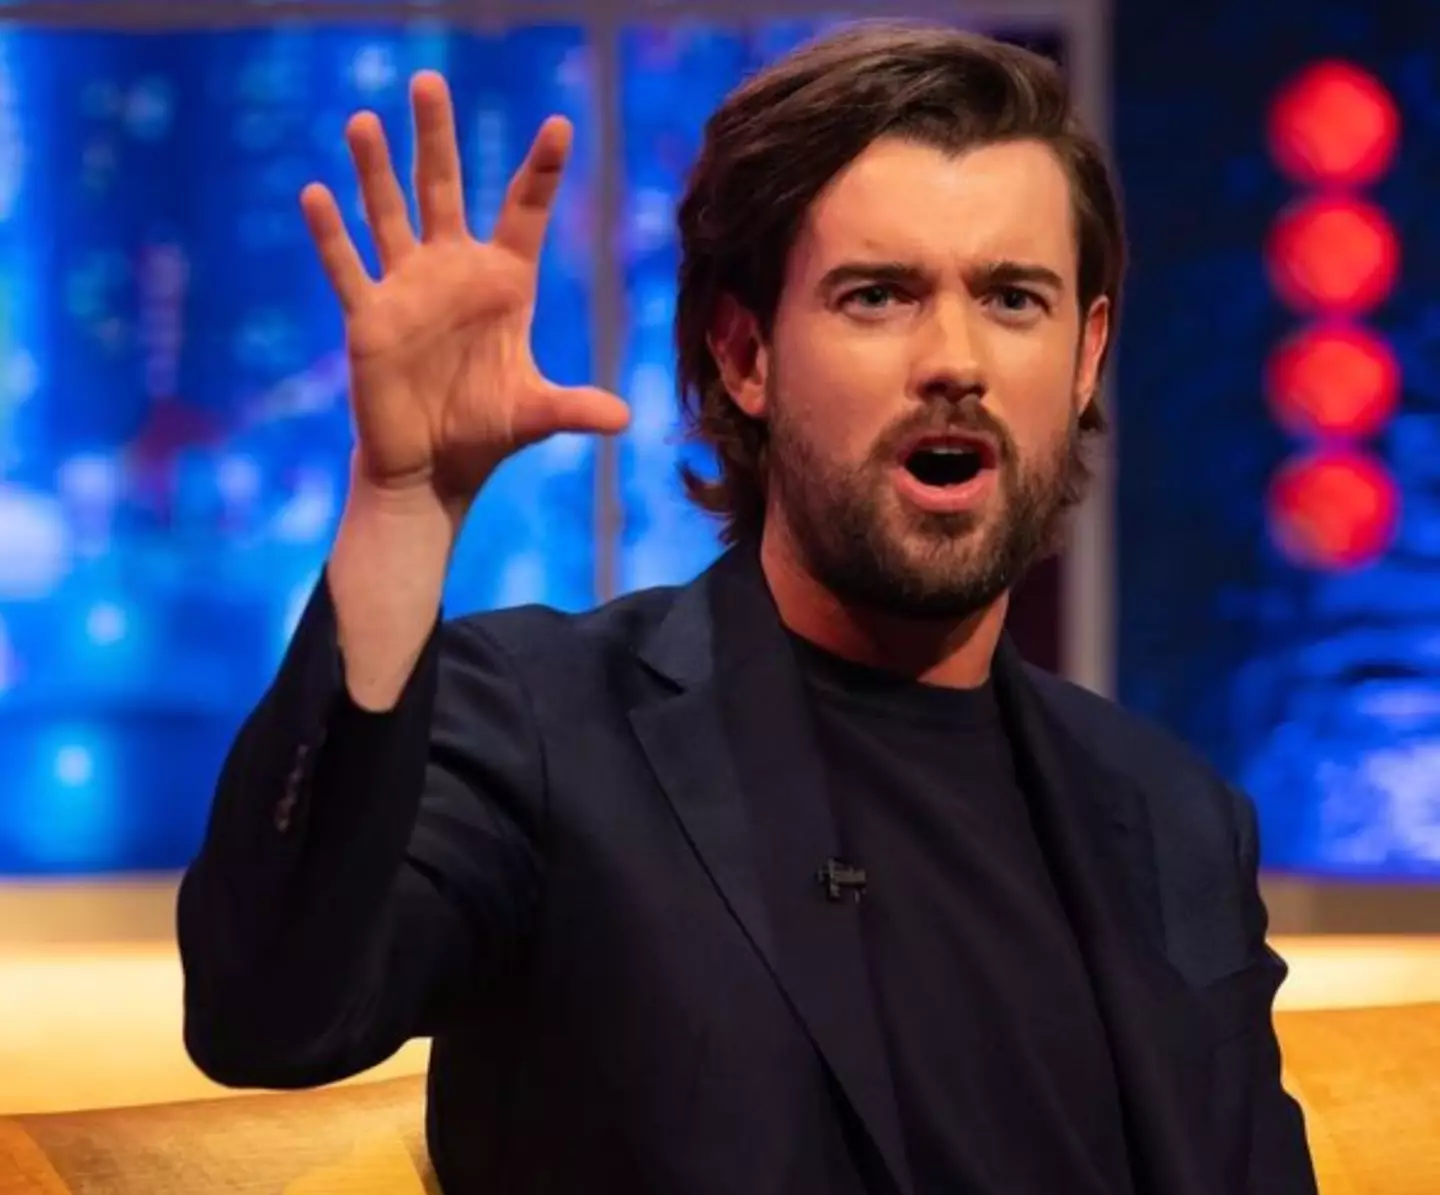 Jack Whitehall's joke about Phillip Schofield and Holly Wilhoughby has left social media users divided.